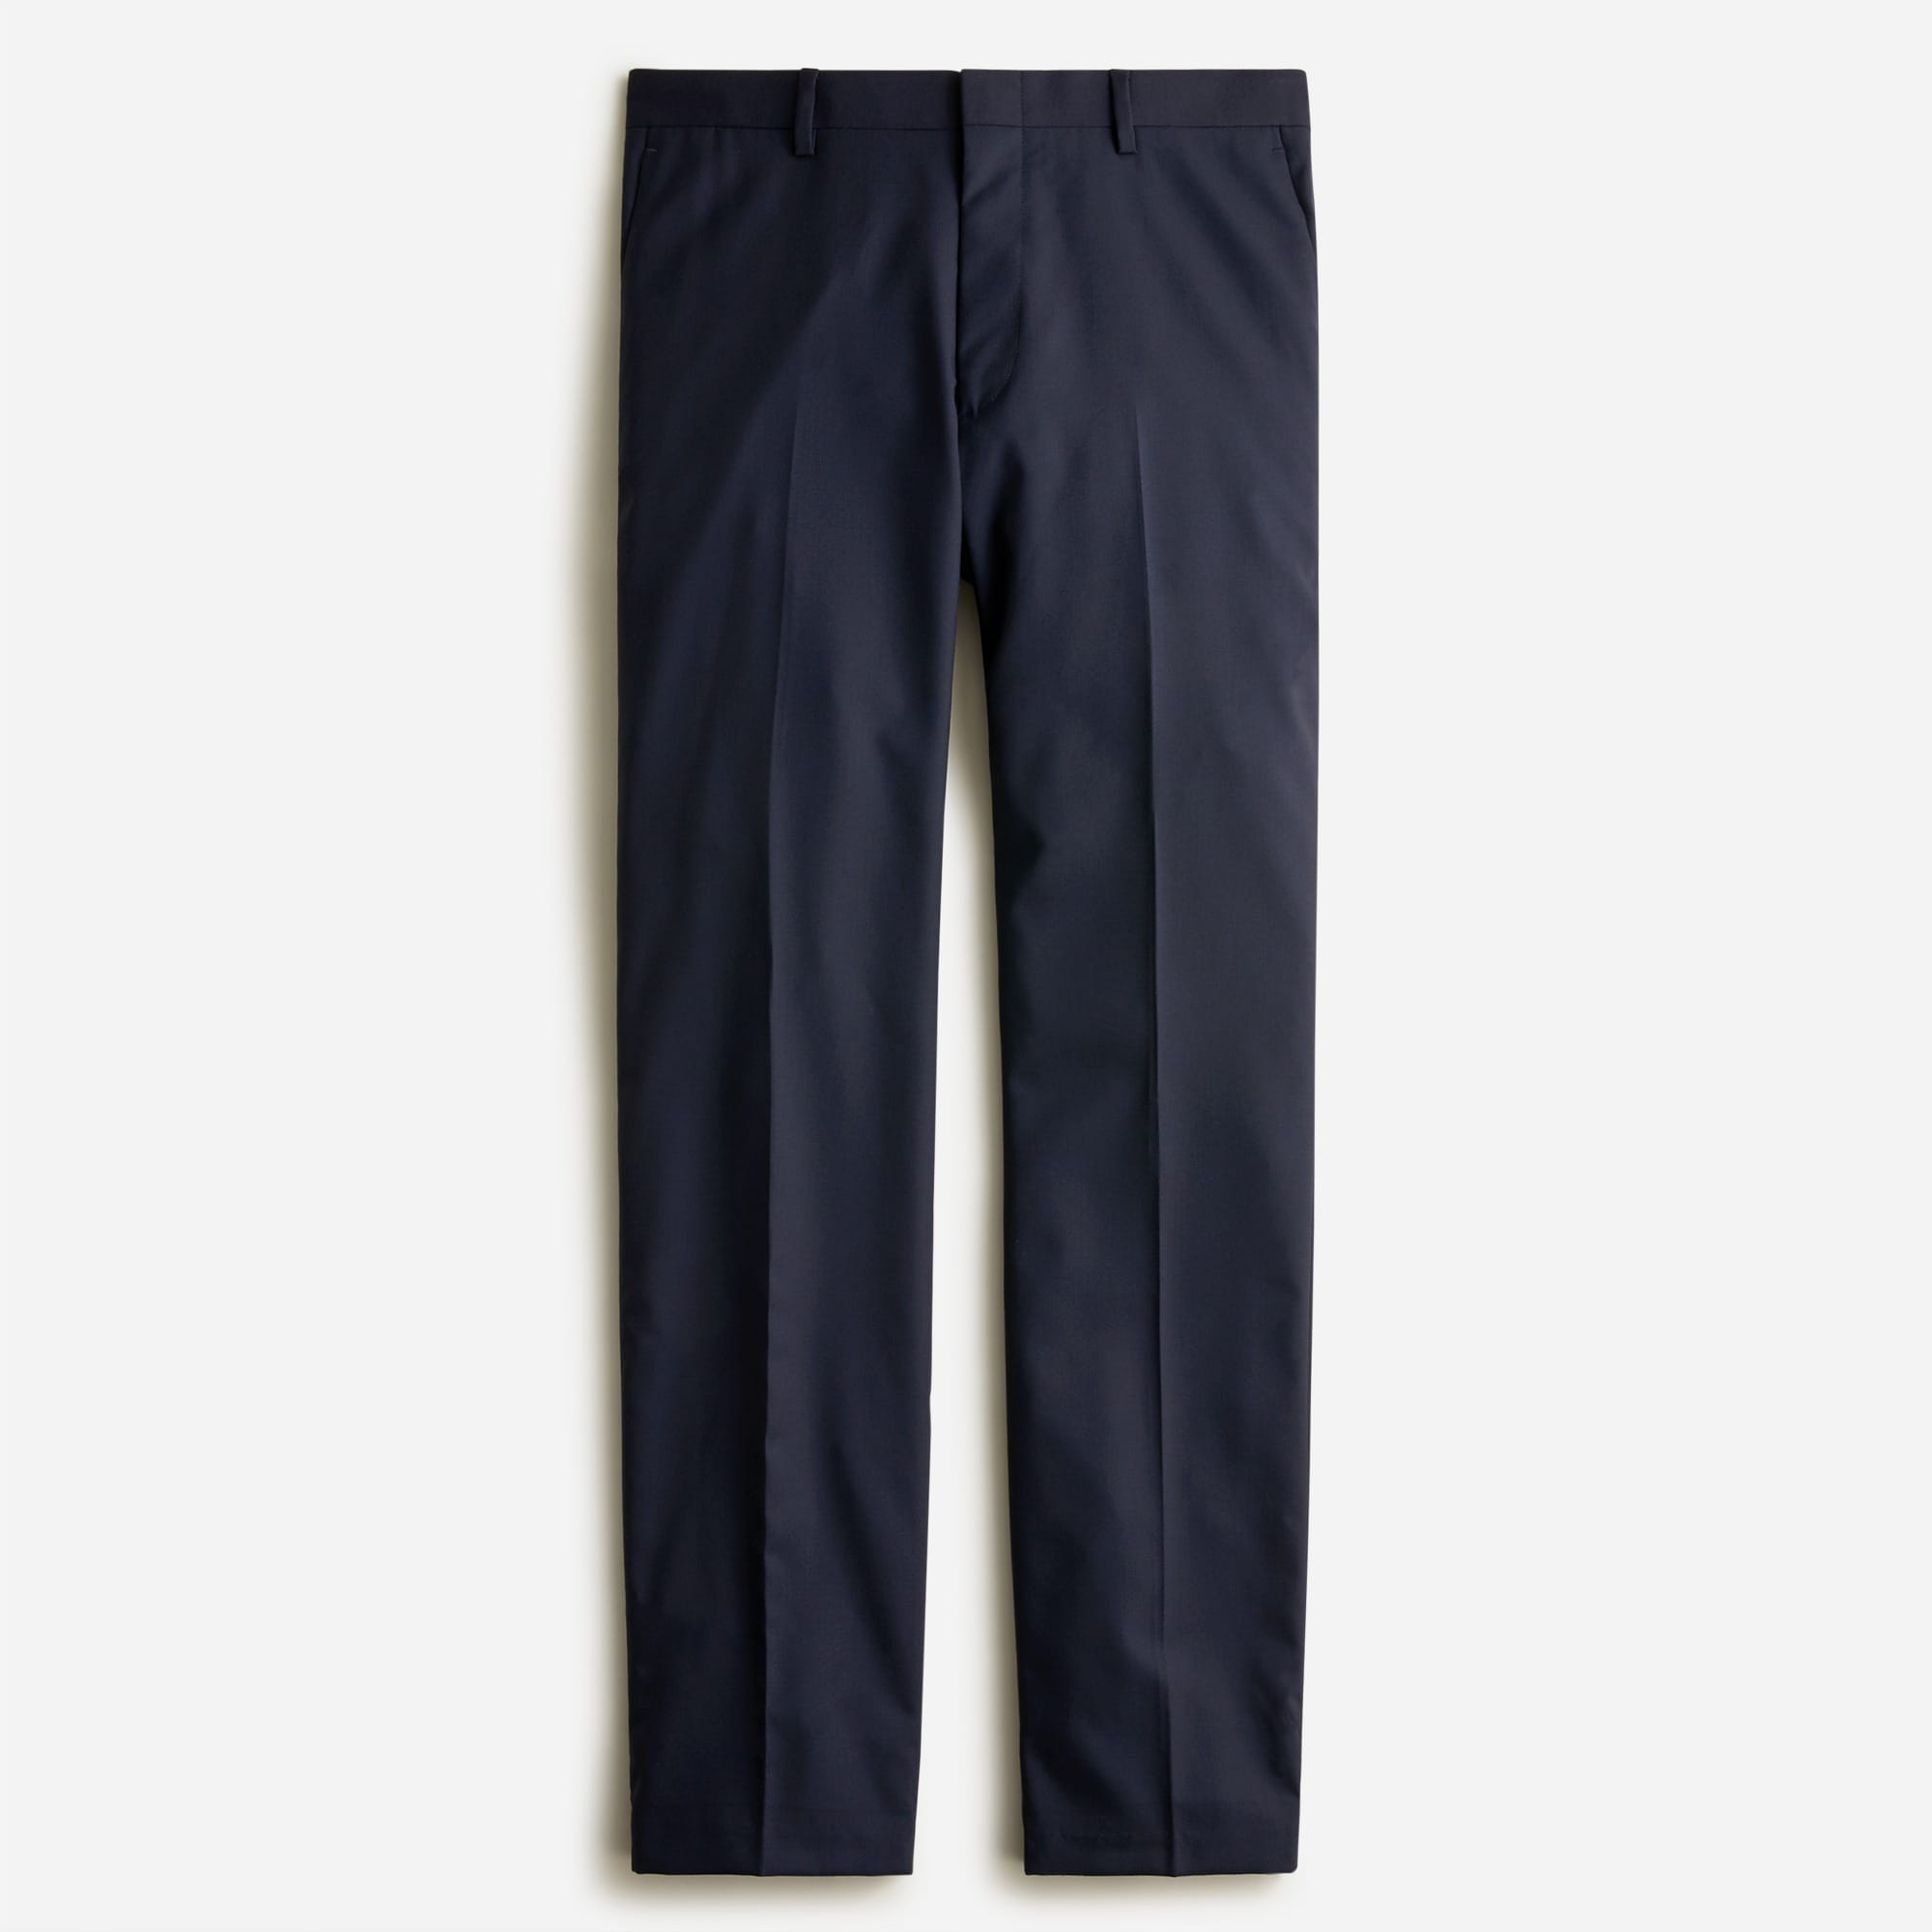  Ludlow Classic-fit suit pant in Italian wool